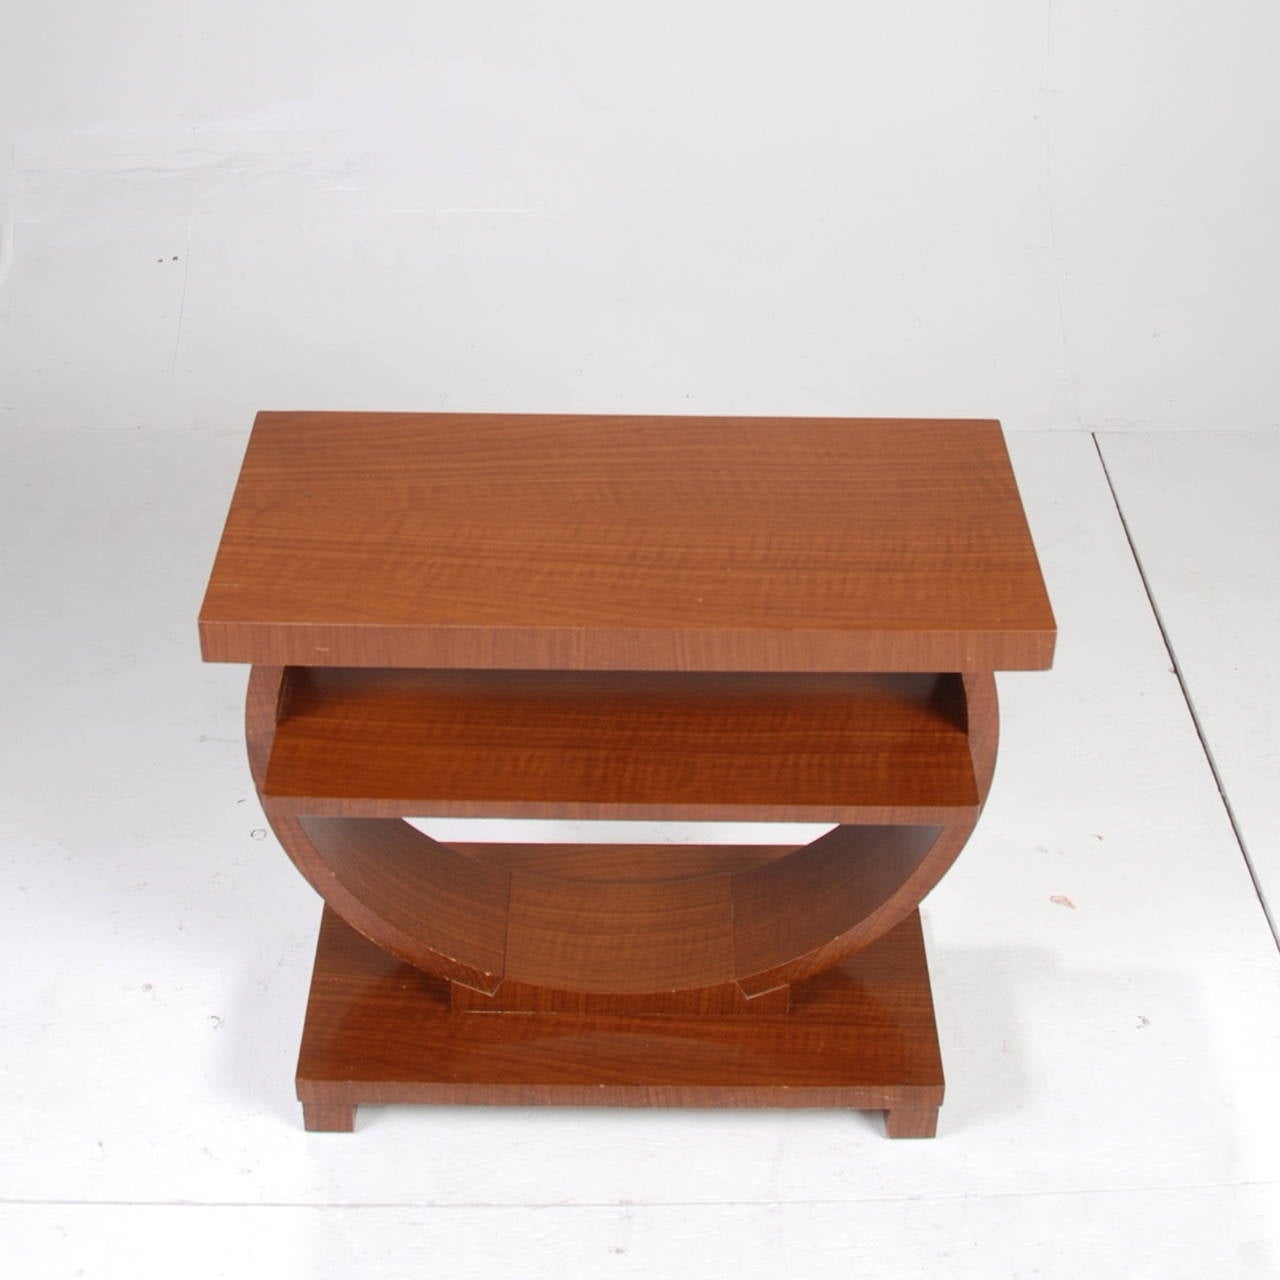 This is a beautiful table by Brown Saltman circa 1938. The lines on this piece are wonderfully formed. The piece is made of solid maple in a beautiful mahogany finish. This piece is in good vintage condition with age appropriate wear.